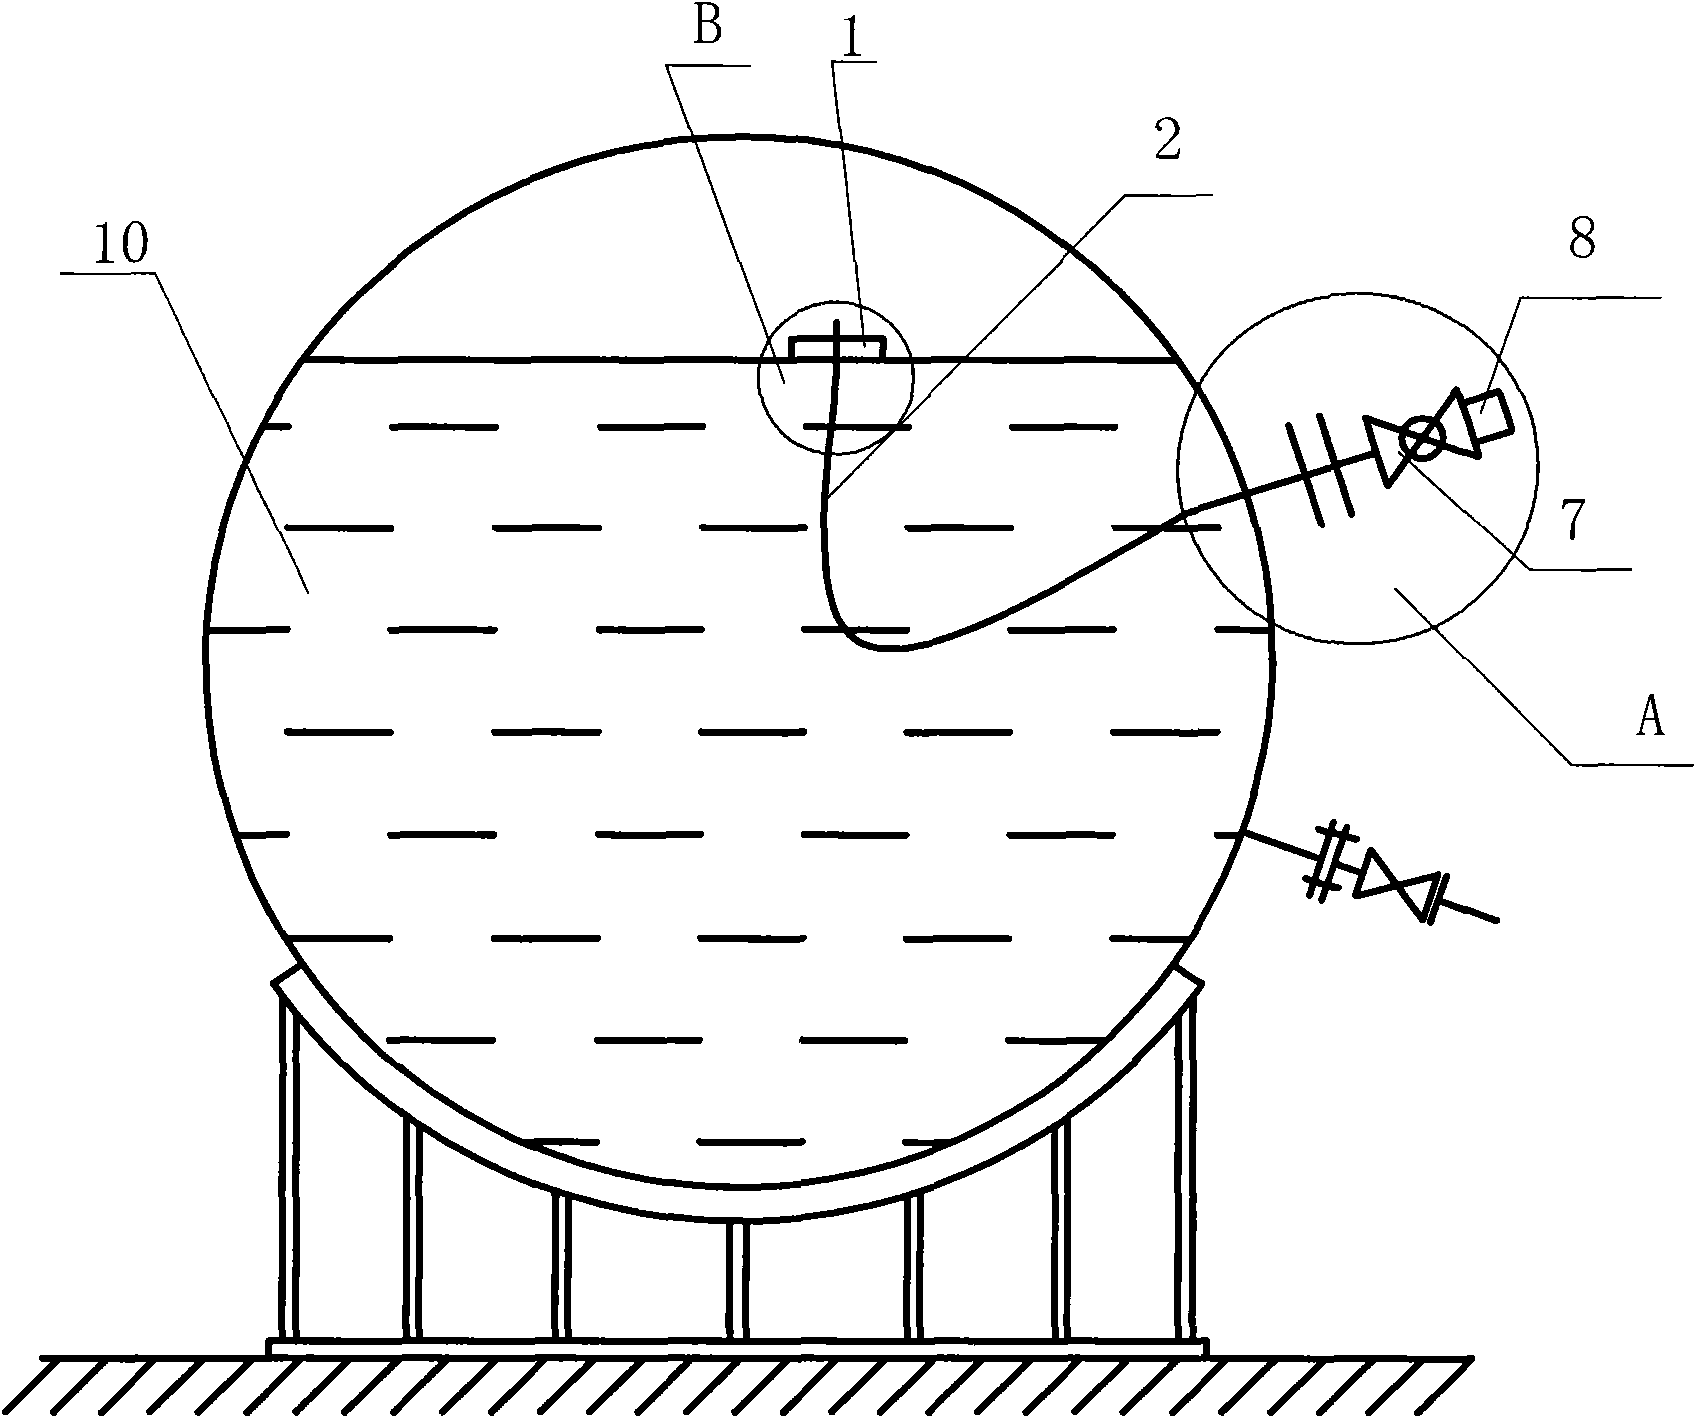 Exhaust device used for hydraulic test of pressure vessel